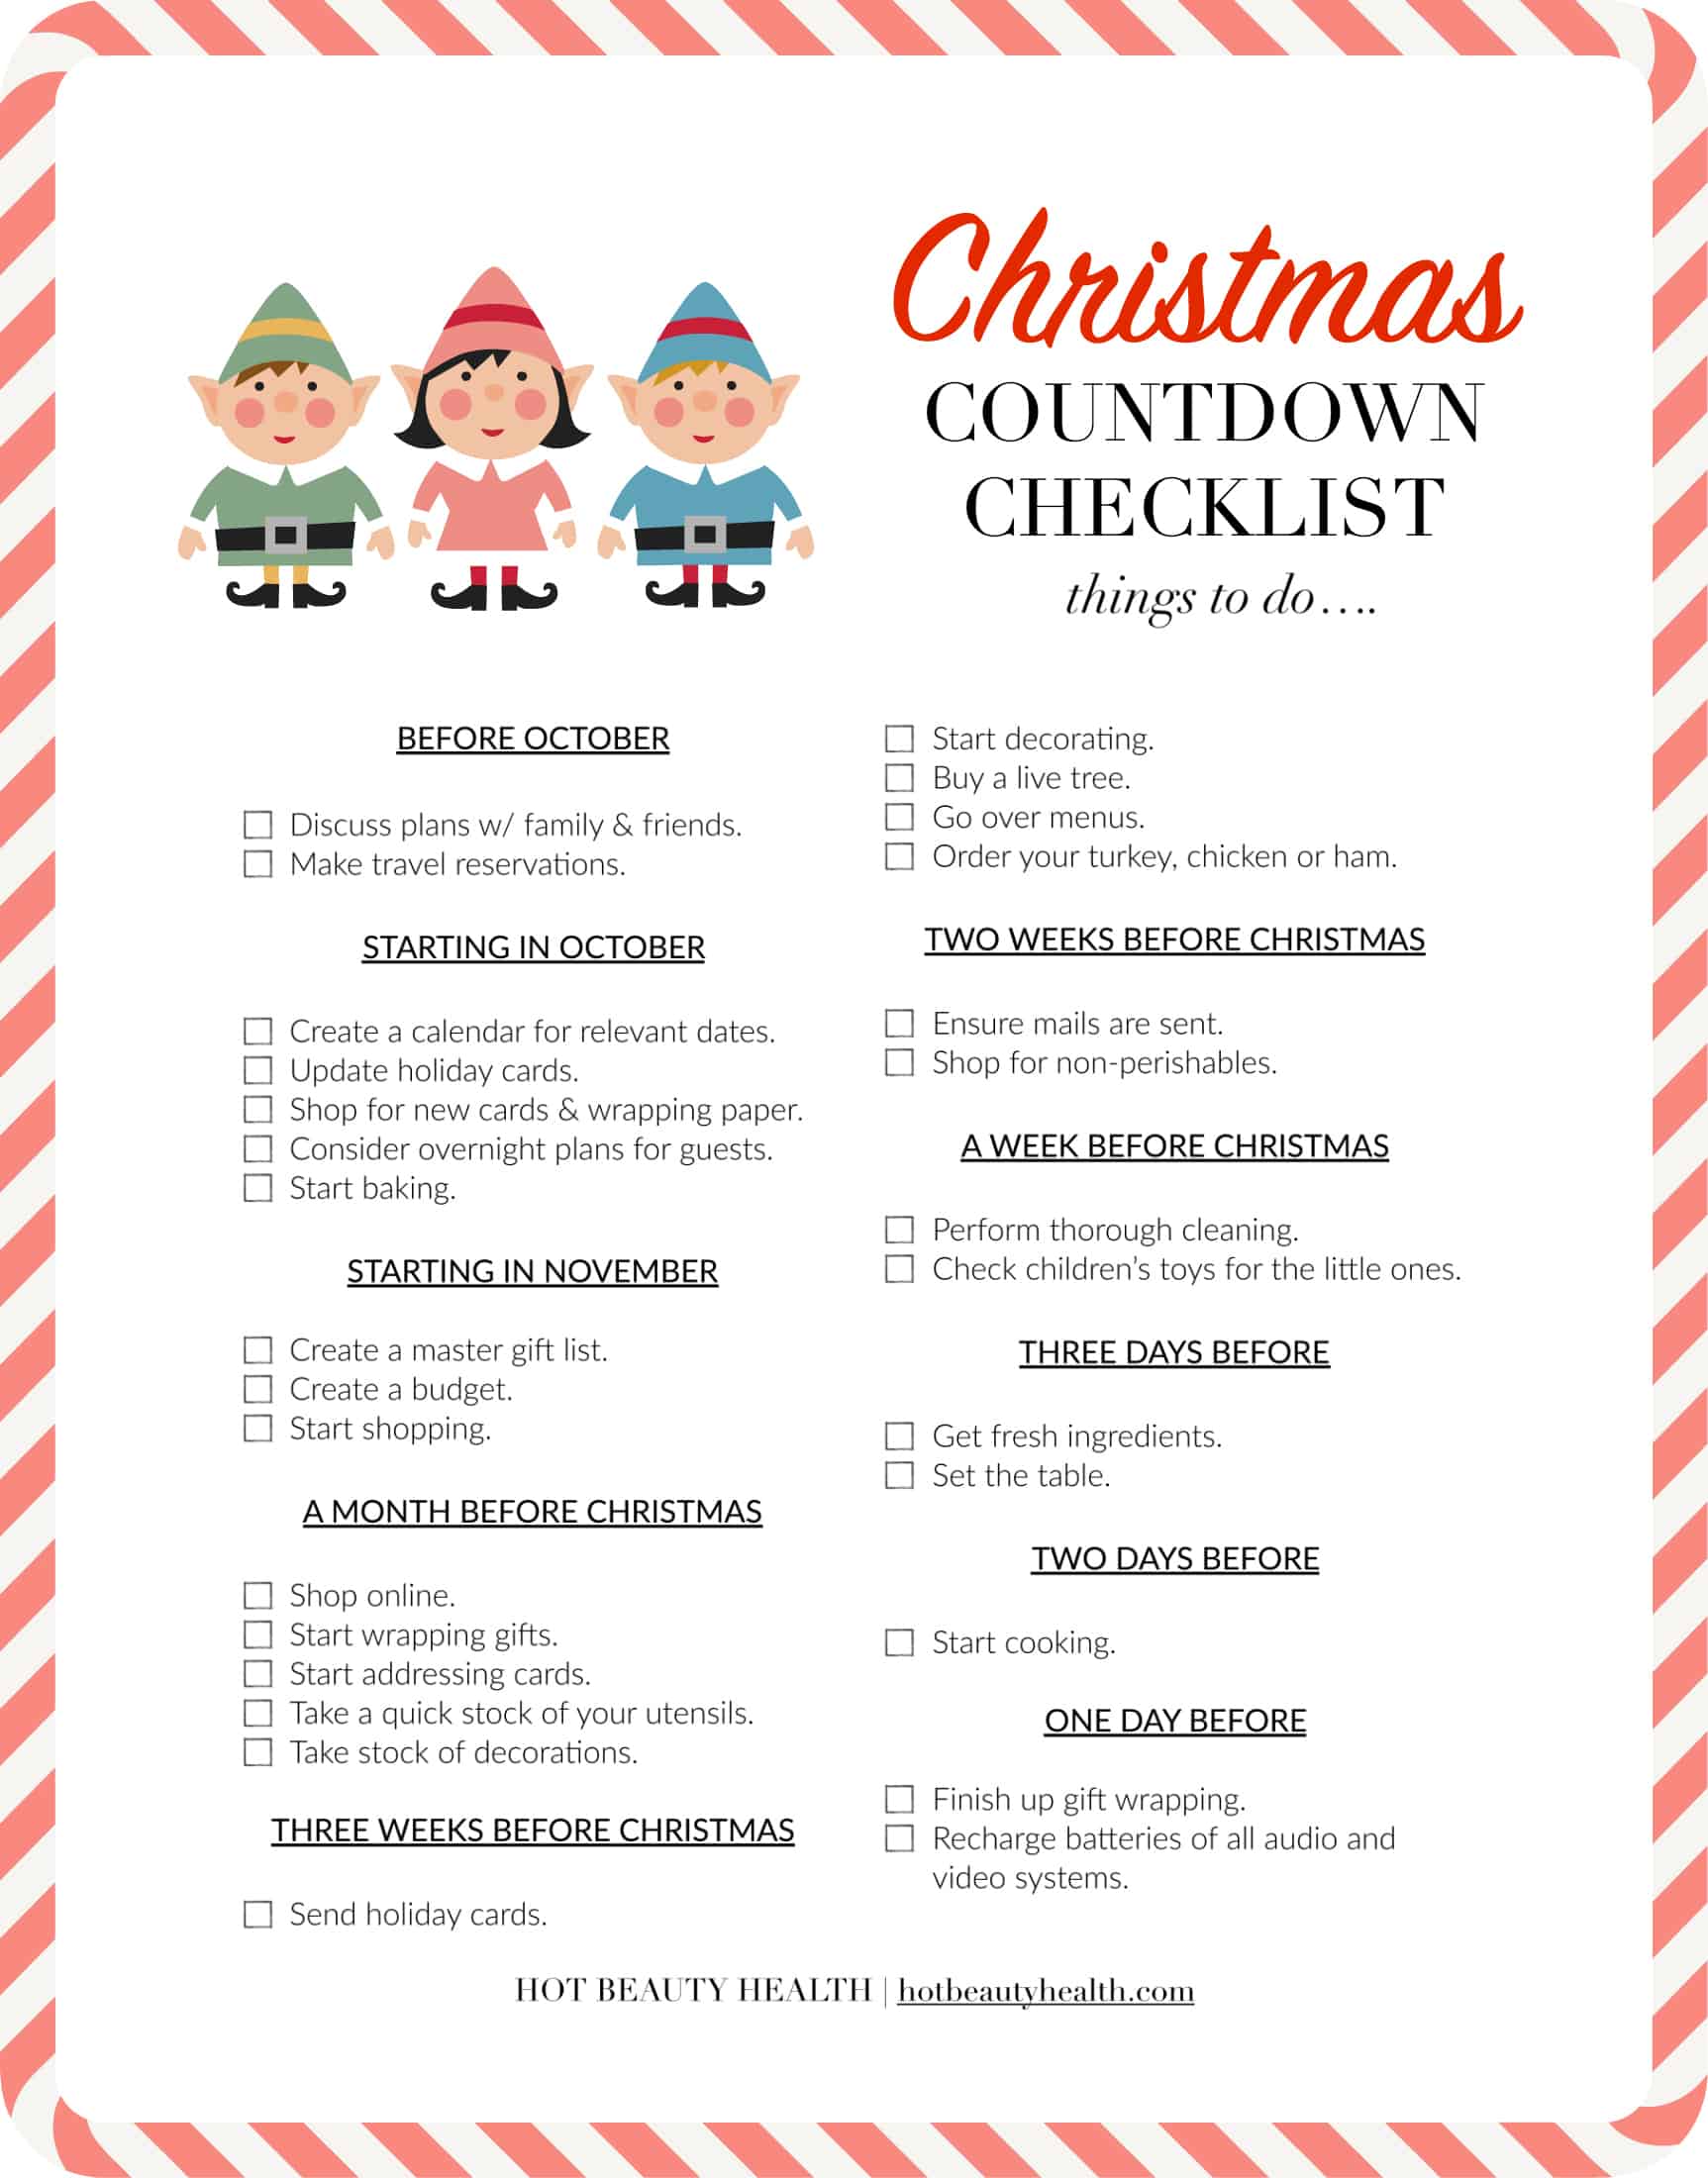 Listed are 29 things you need to do leading up to Christmas. This printable holiday countdown checklist will help you keep track of big tasks and stay organized.